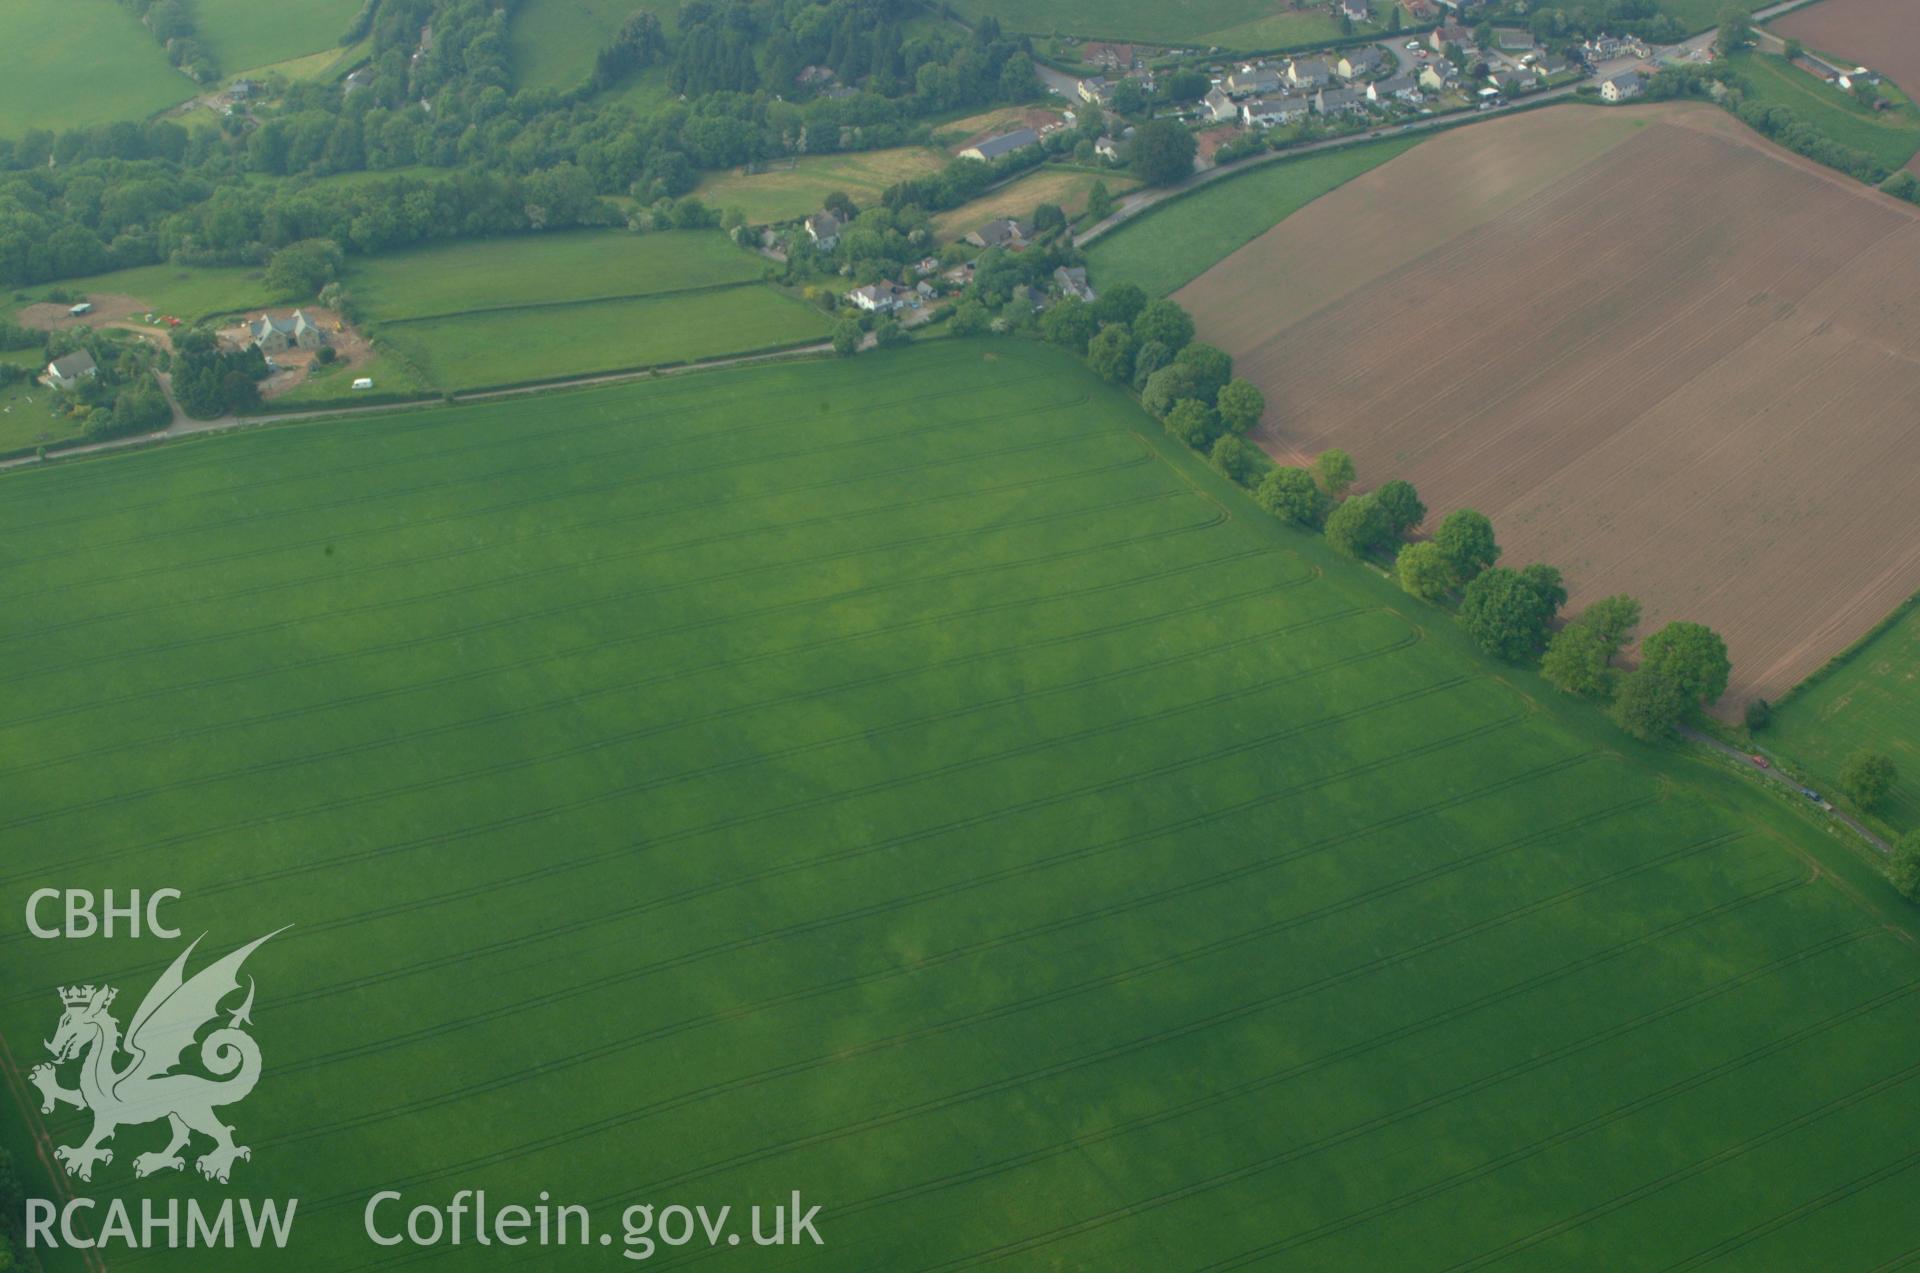 RCAHMW colour oblique aerial photograph of Llanishen, Monmouthshire. Taken on 27 May 2004 by Toby Driver